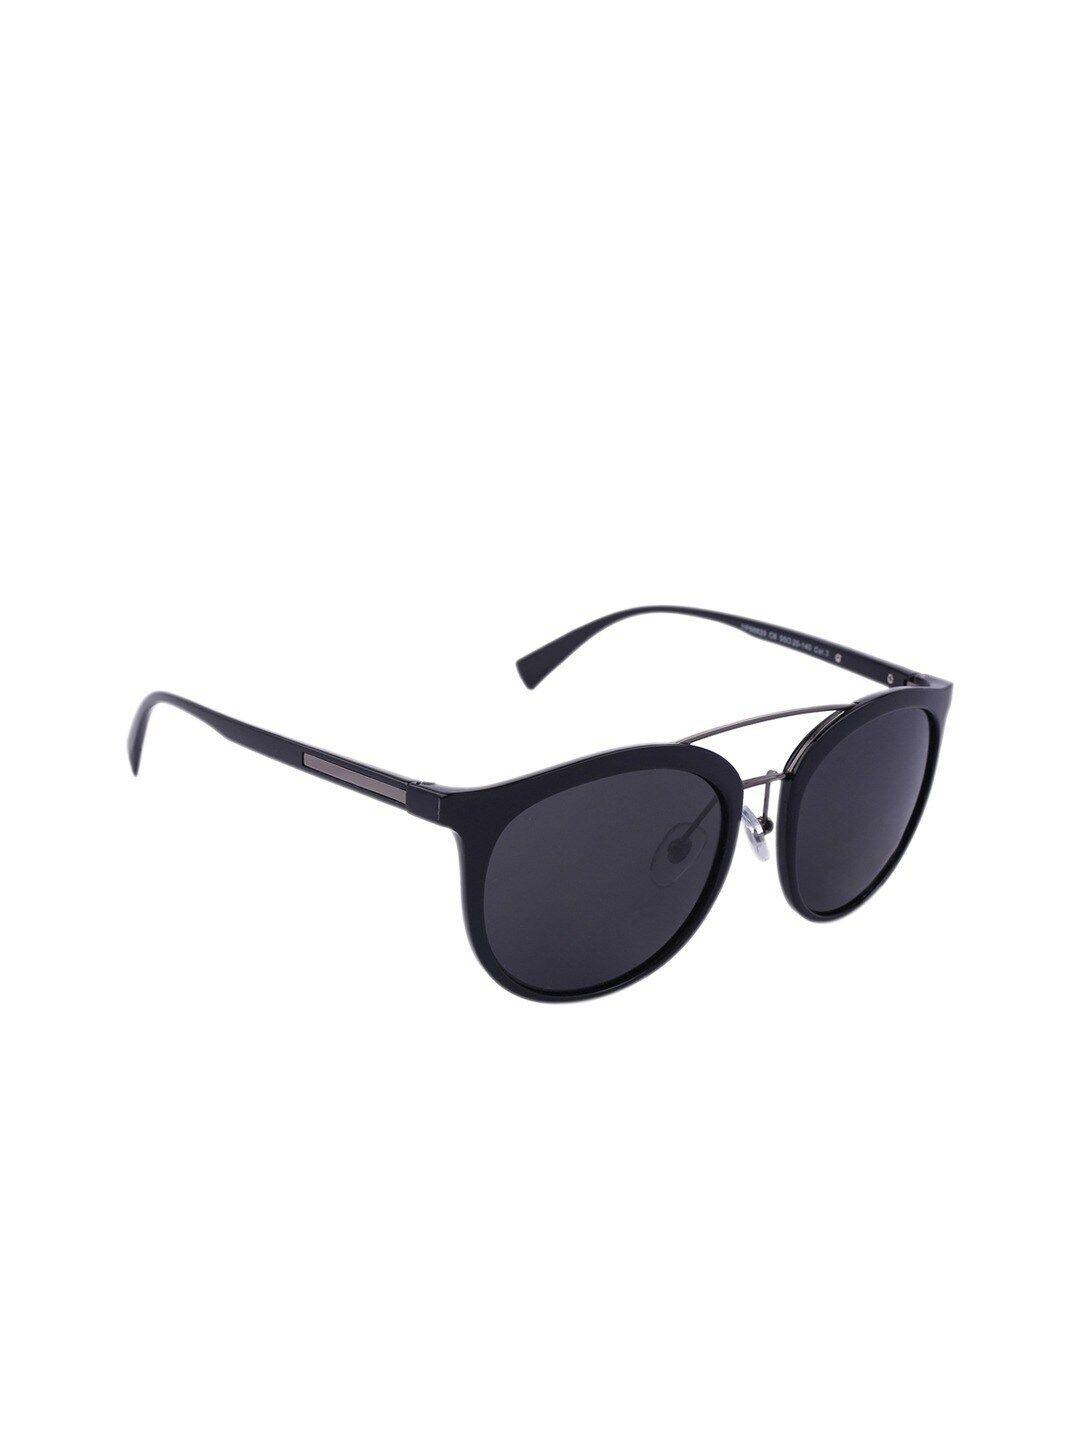 marc louis unisex black lens & black oval sunglasses with polarised and uv protected lens